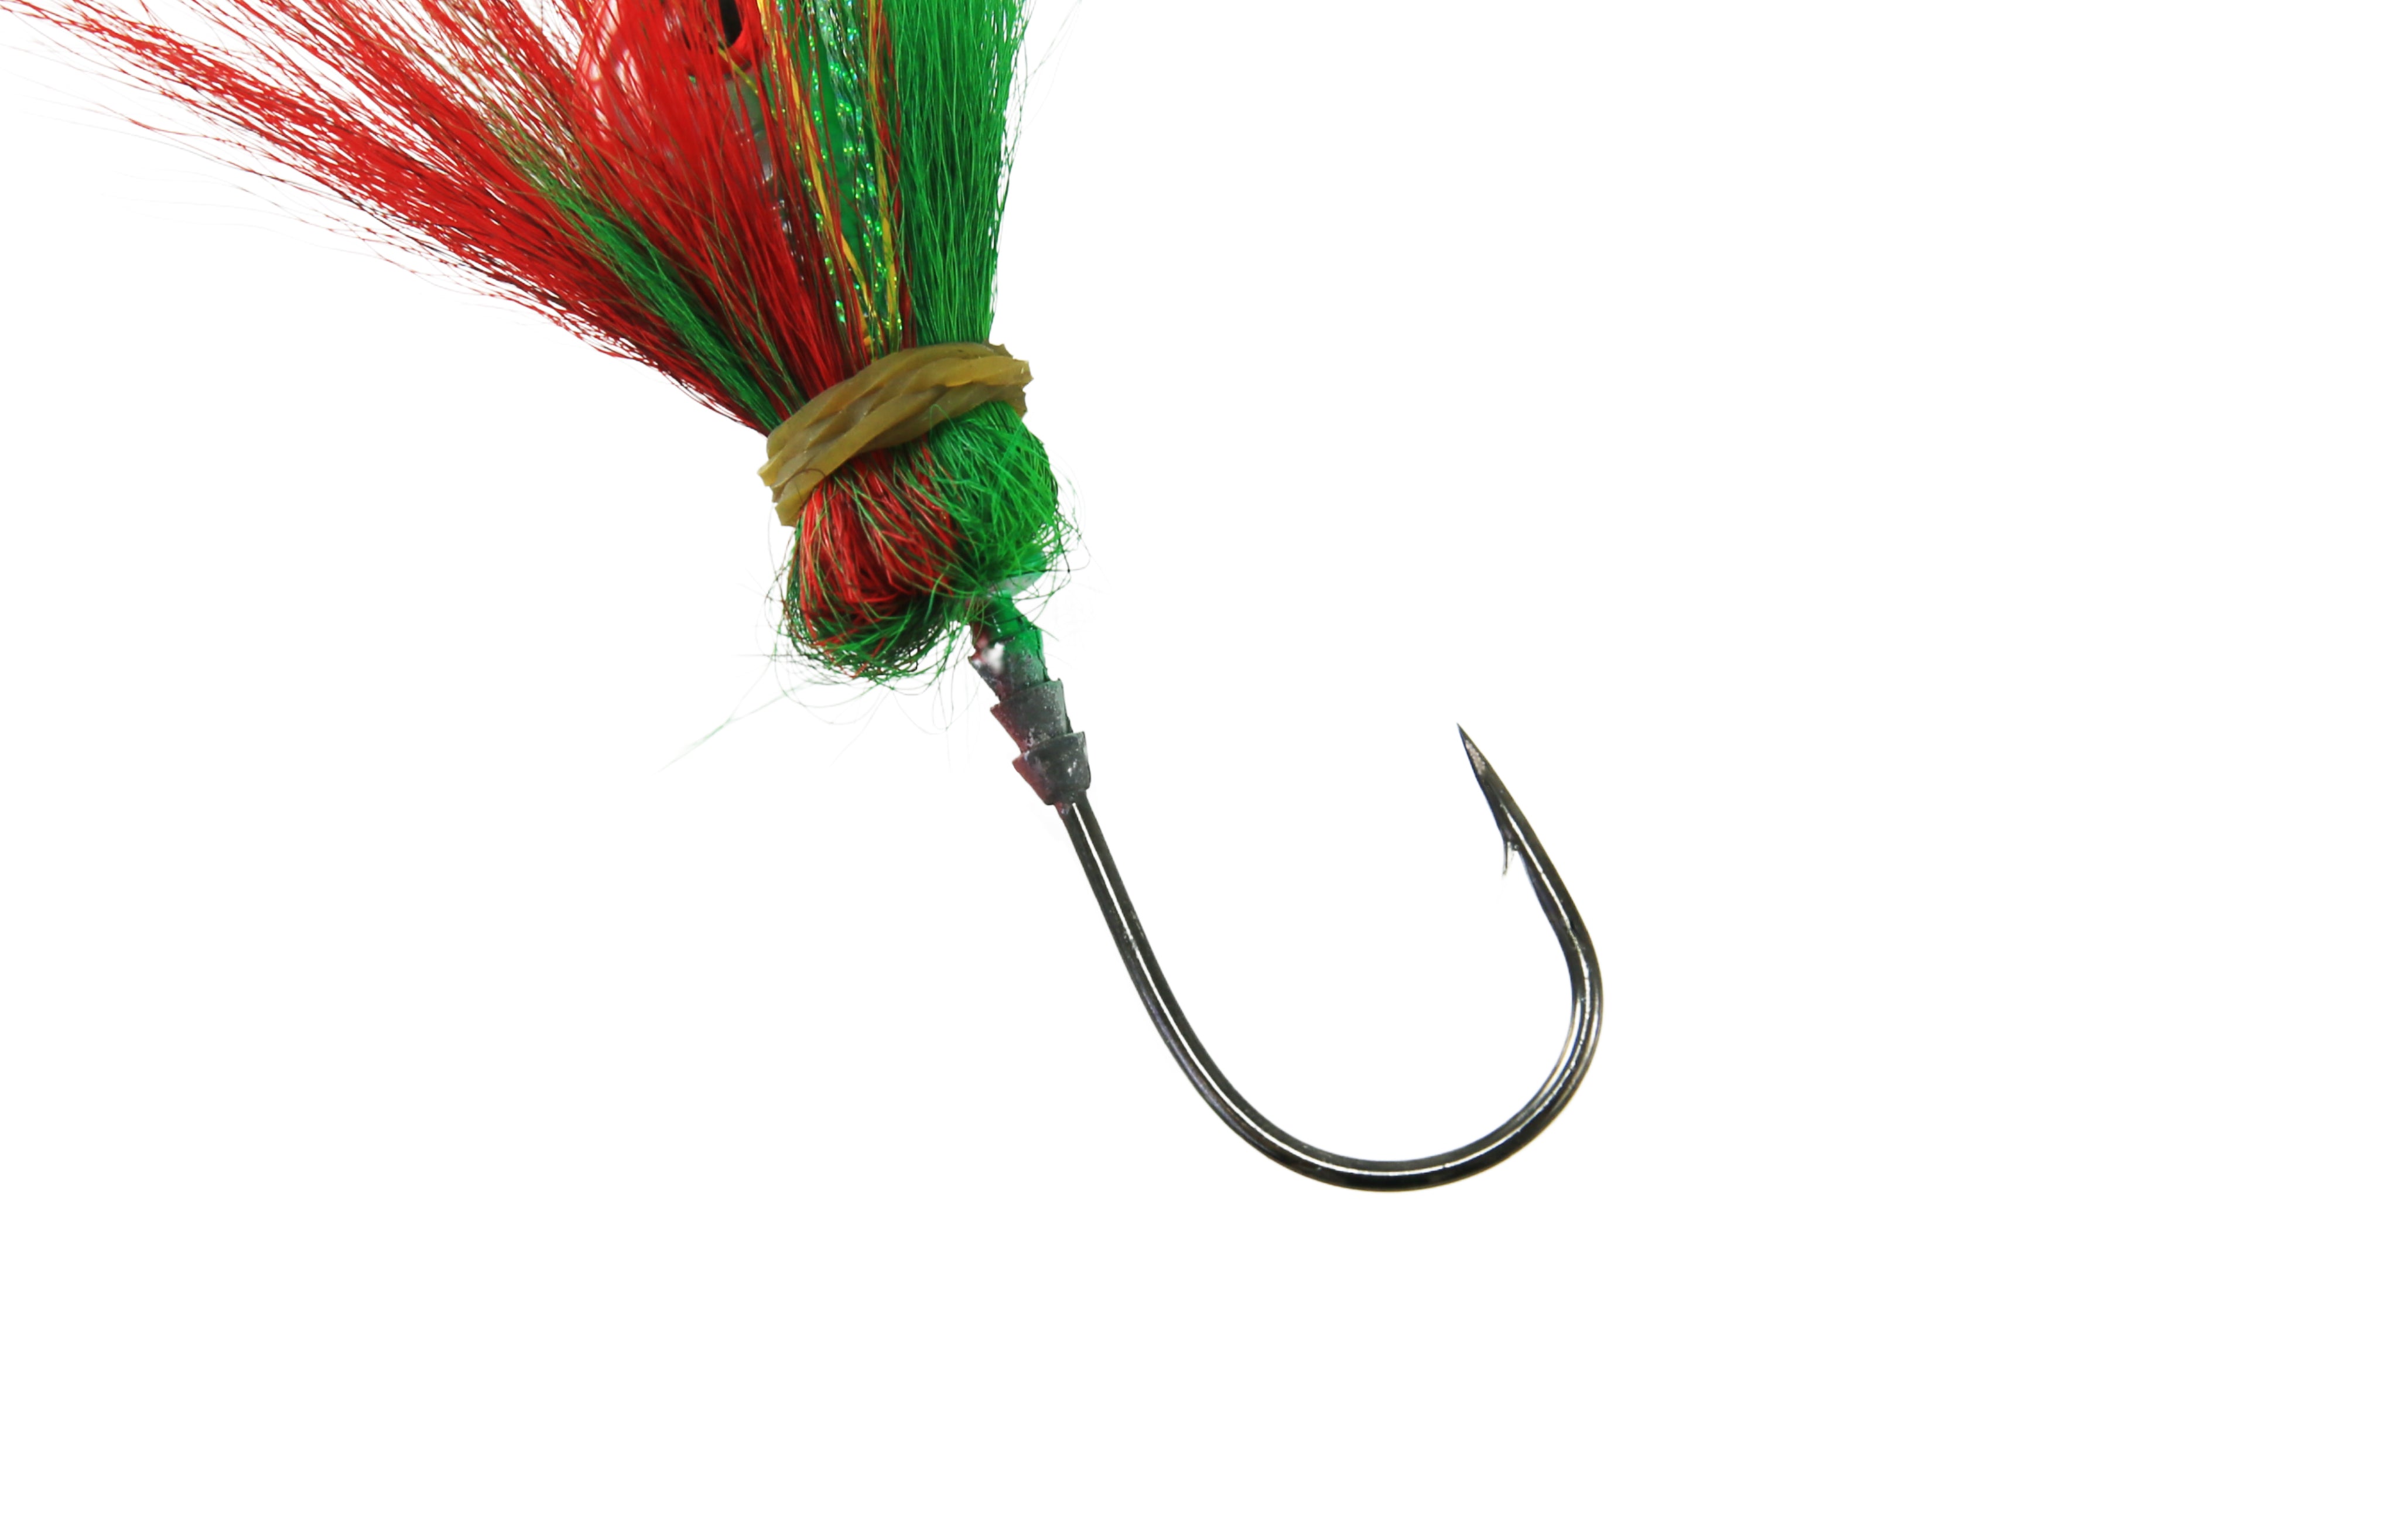 Buzzbait, CLEARANCE, LIMITED STOCK